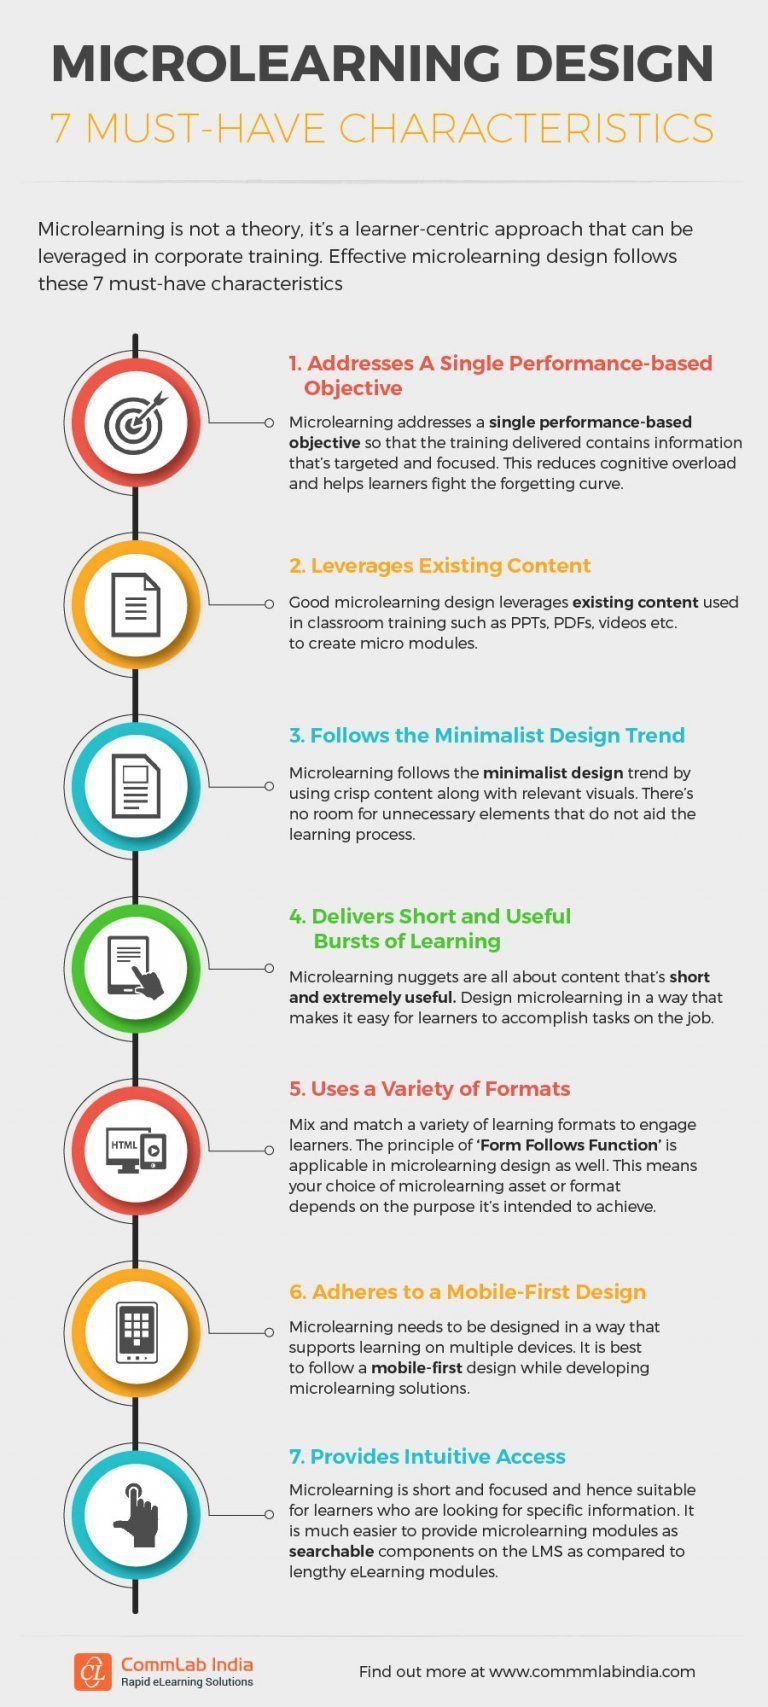 7 Must-Have Characteristics of Microlearning Design